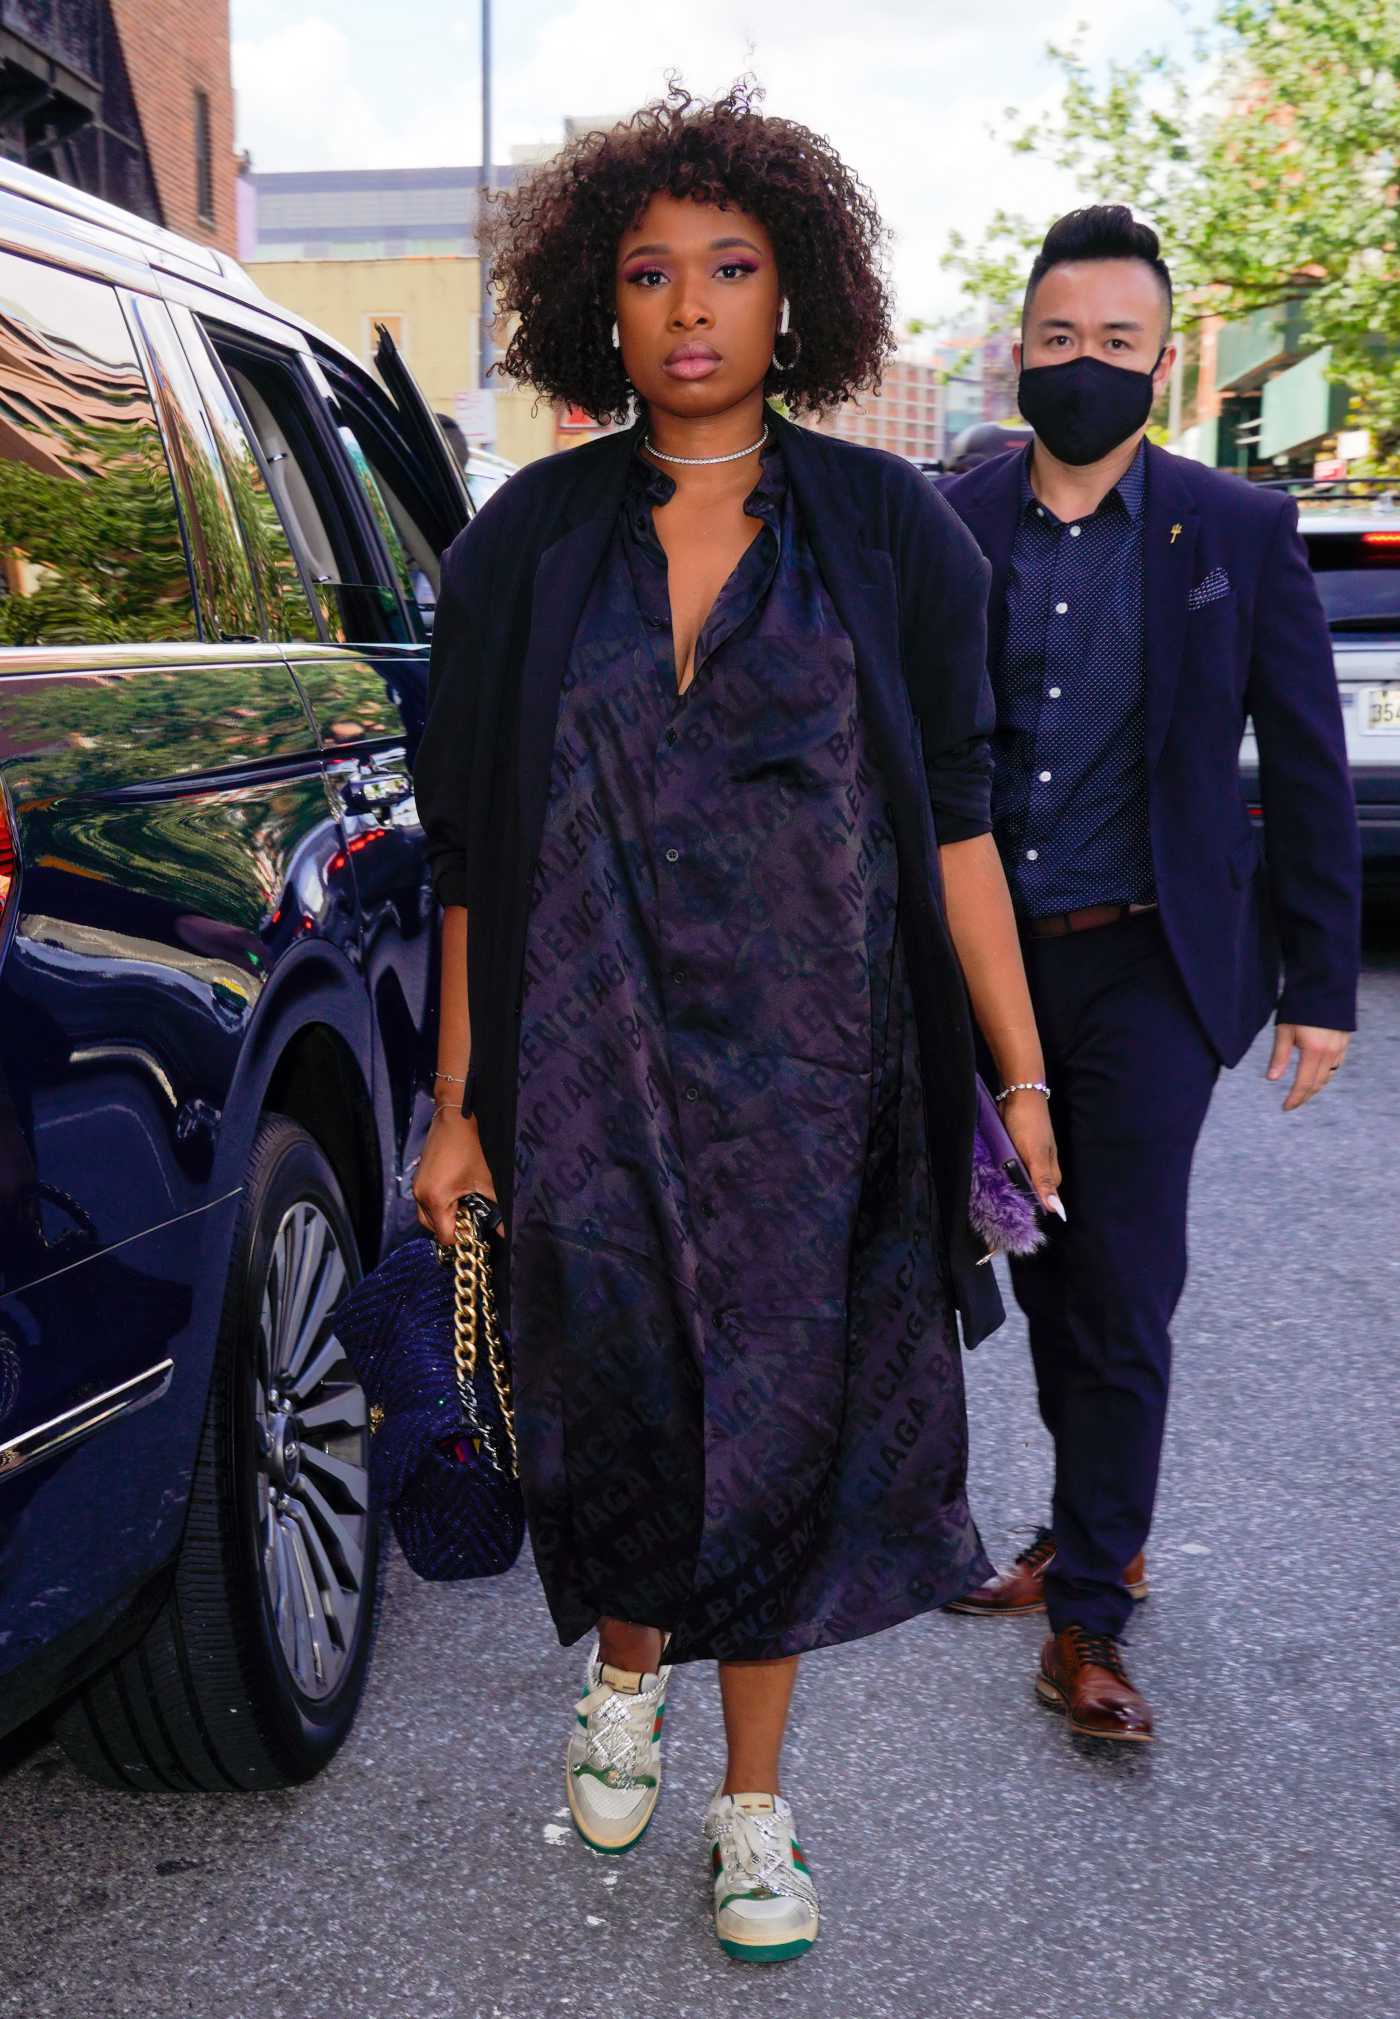 Jennifer Hudson in a Black Blazer Arrives at the Apollo Theater for Her Performance in Harlem, New York 08/20/2021